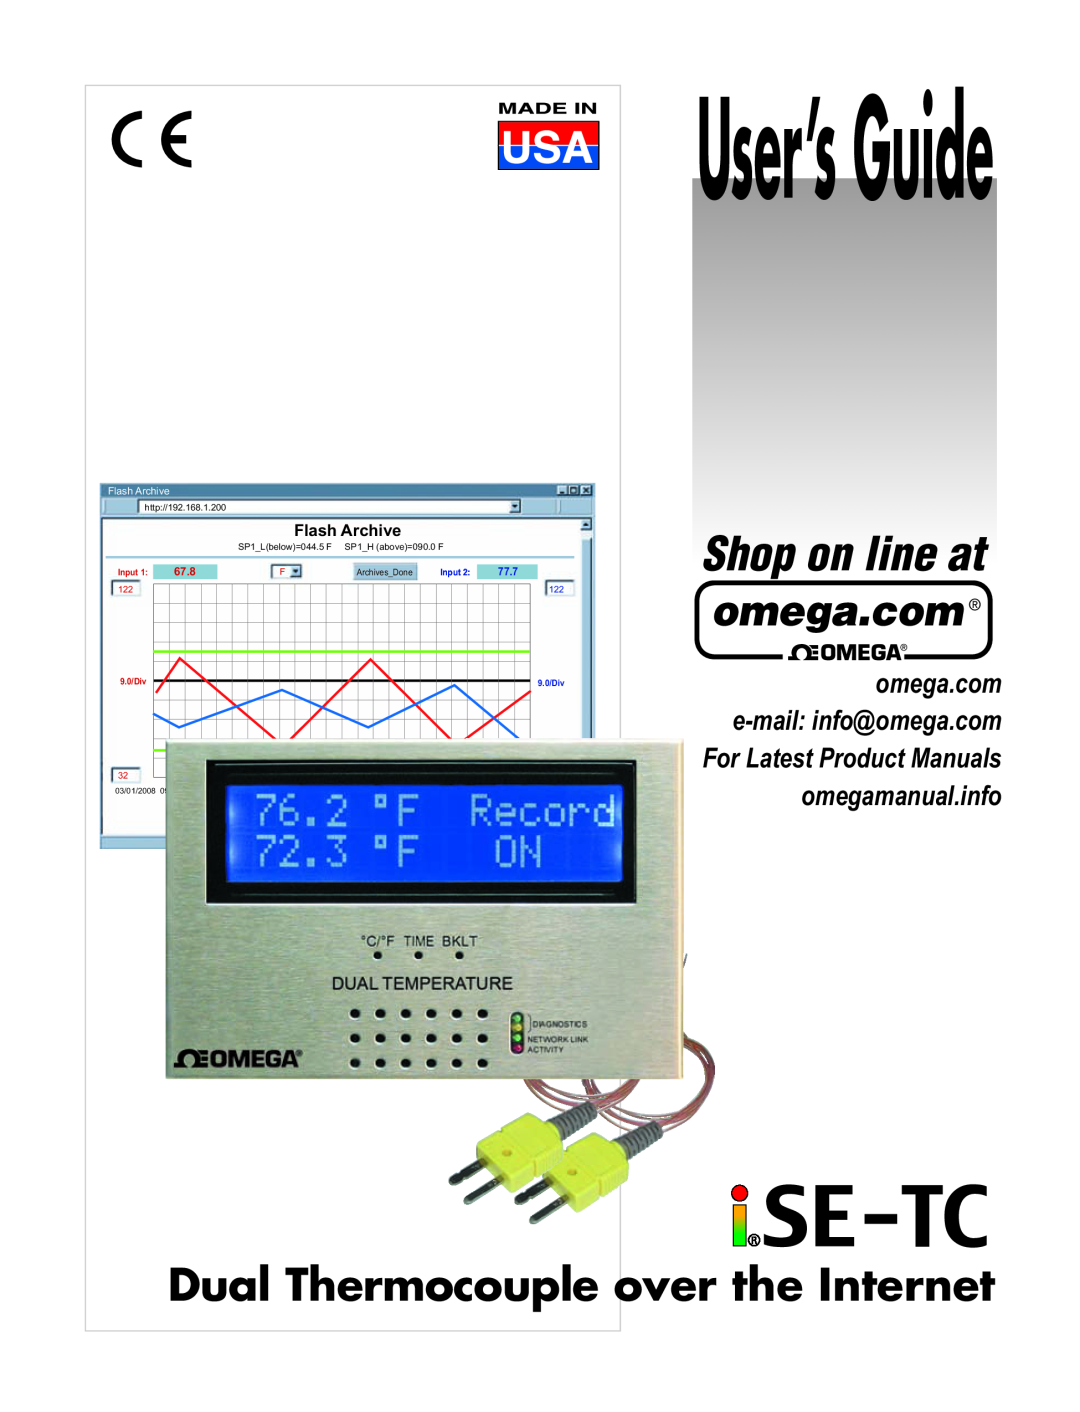 Omega Speaker Systems iSE-TC manual Shop on line at, User’s Guide, Dual Thermocouple over the Internet, omegamanual.info 